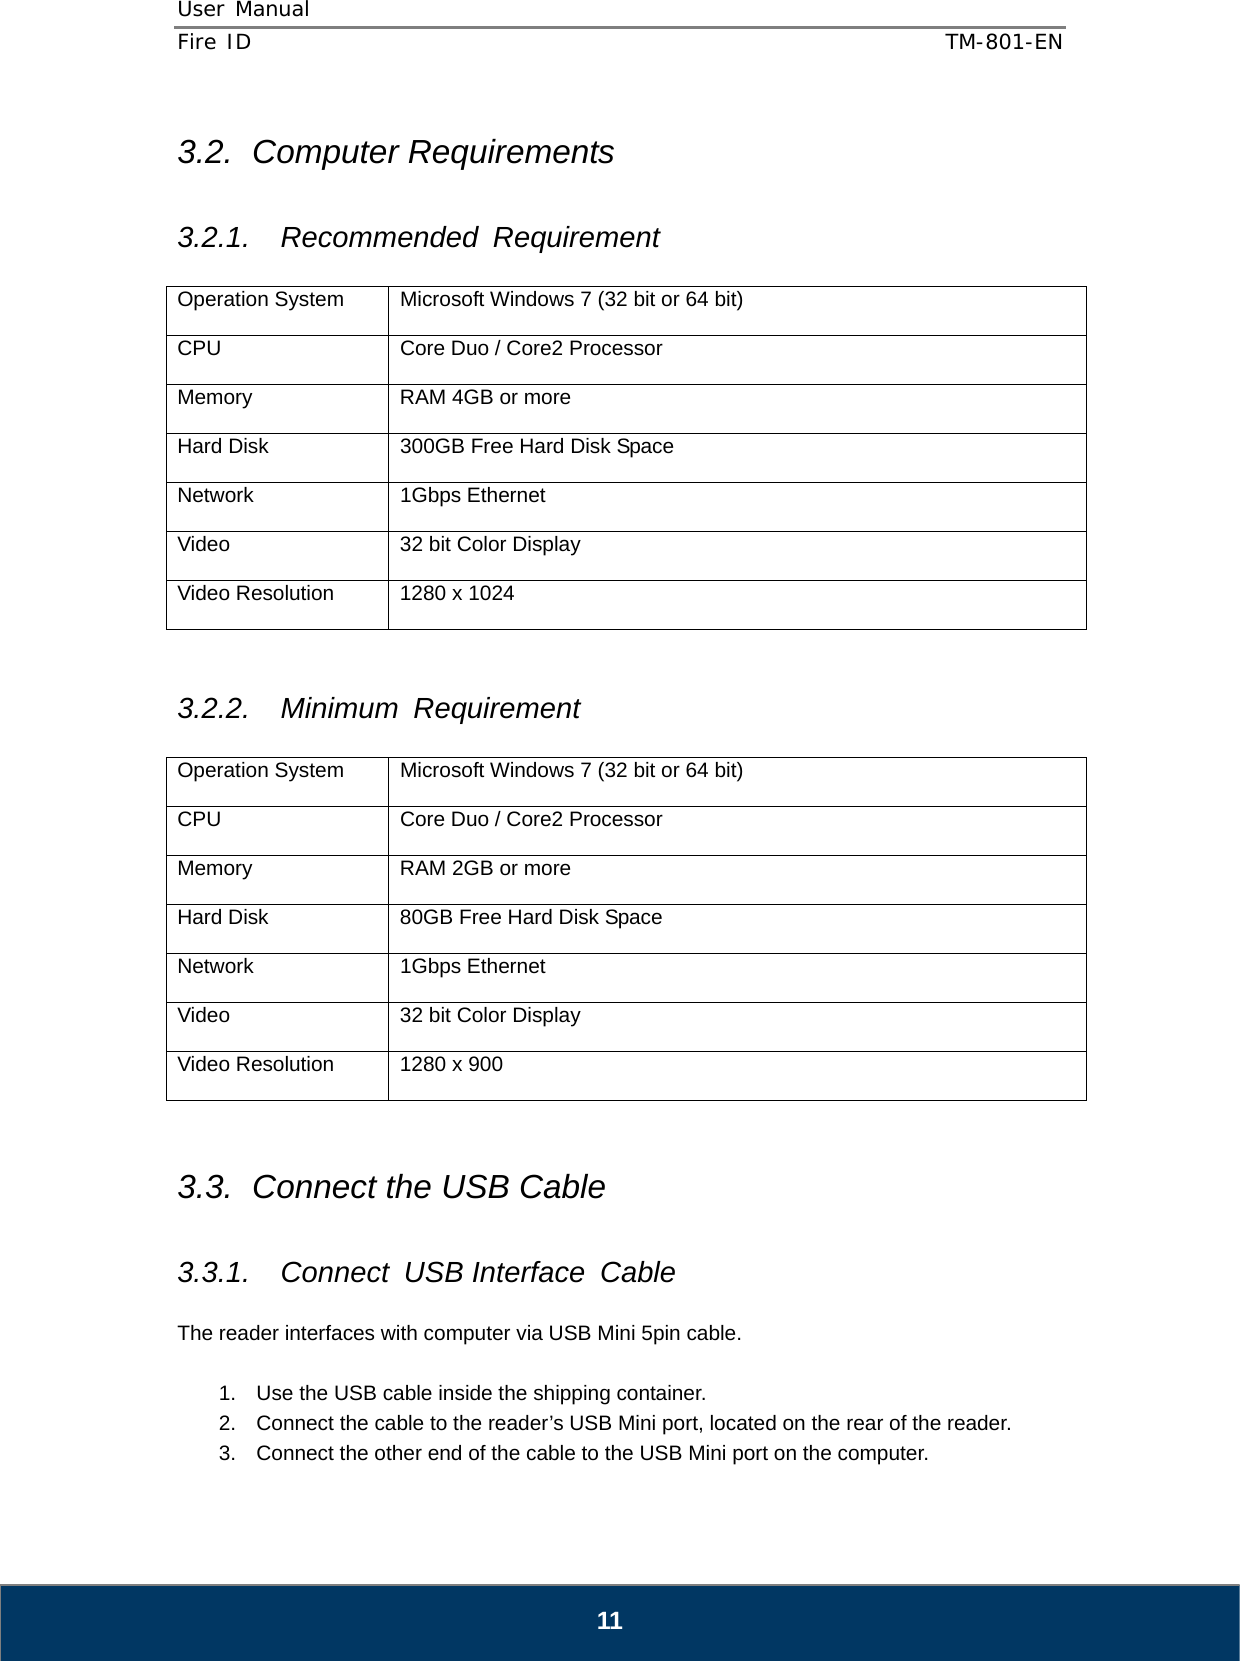 User Manual  Fire ID    TM-801-EN   11 3.2. Computer Requirements  3.2.1. Recommended Requirement  Operation System  Microsoft Windows 7 (32 bit or 64 bit) CPU  Core Duo / Core2 Processor Memory  RAM 4GB or more Hard Disk  300GB Free Hard Disk Space Network 1Gbps Ethernet Video  32 bit Color Display Video Resolution  1280 x 1024   3.2.2. Minimum Requirement  Operation System  Microsoft Windows 7 (32 bit or 64 bit) CPU  Core Duo / Core2 Processor Memory  RAM 2GB or more Hard Disk  80GB Free Hard Disk Space Network 1Gbps Ethernet Video  32 bit Color Display Video Resolution  1280 x 900  3.3.  Connect the USB Cable  3.3.1. Connect USB Interface Cable  The reader interfaces with computer via USB Mini 5pin cable.  1.  Use the USB cable inside the shipping container. 2.  Connect the cable to the reader’s USB Mini port, located on the rear of the reader. 3.  Connect the other end of the cable to the USB Mini port on the computer. 